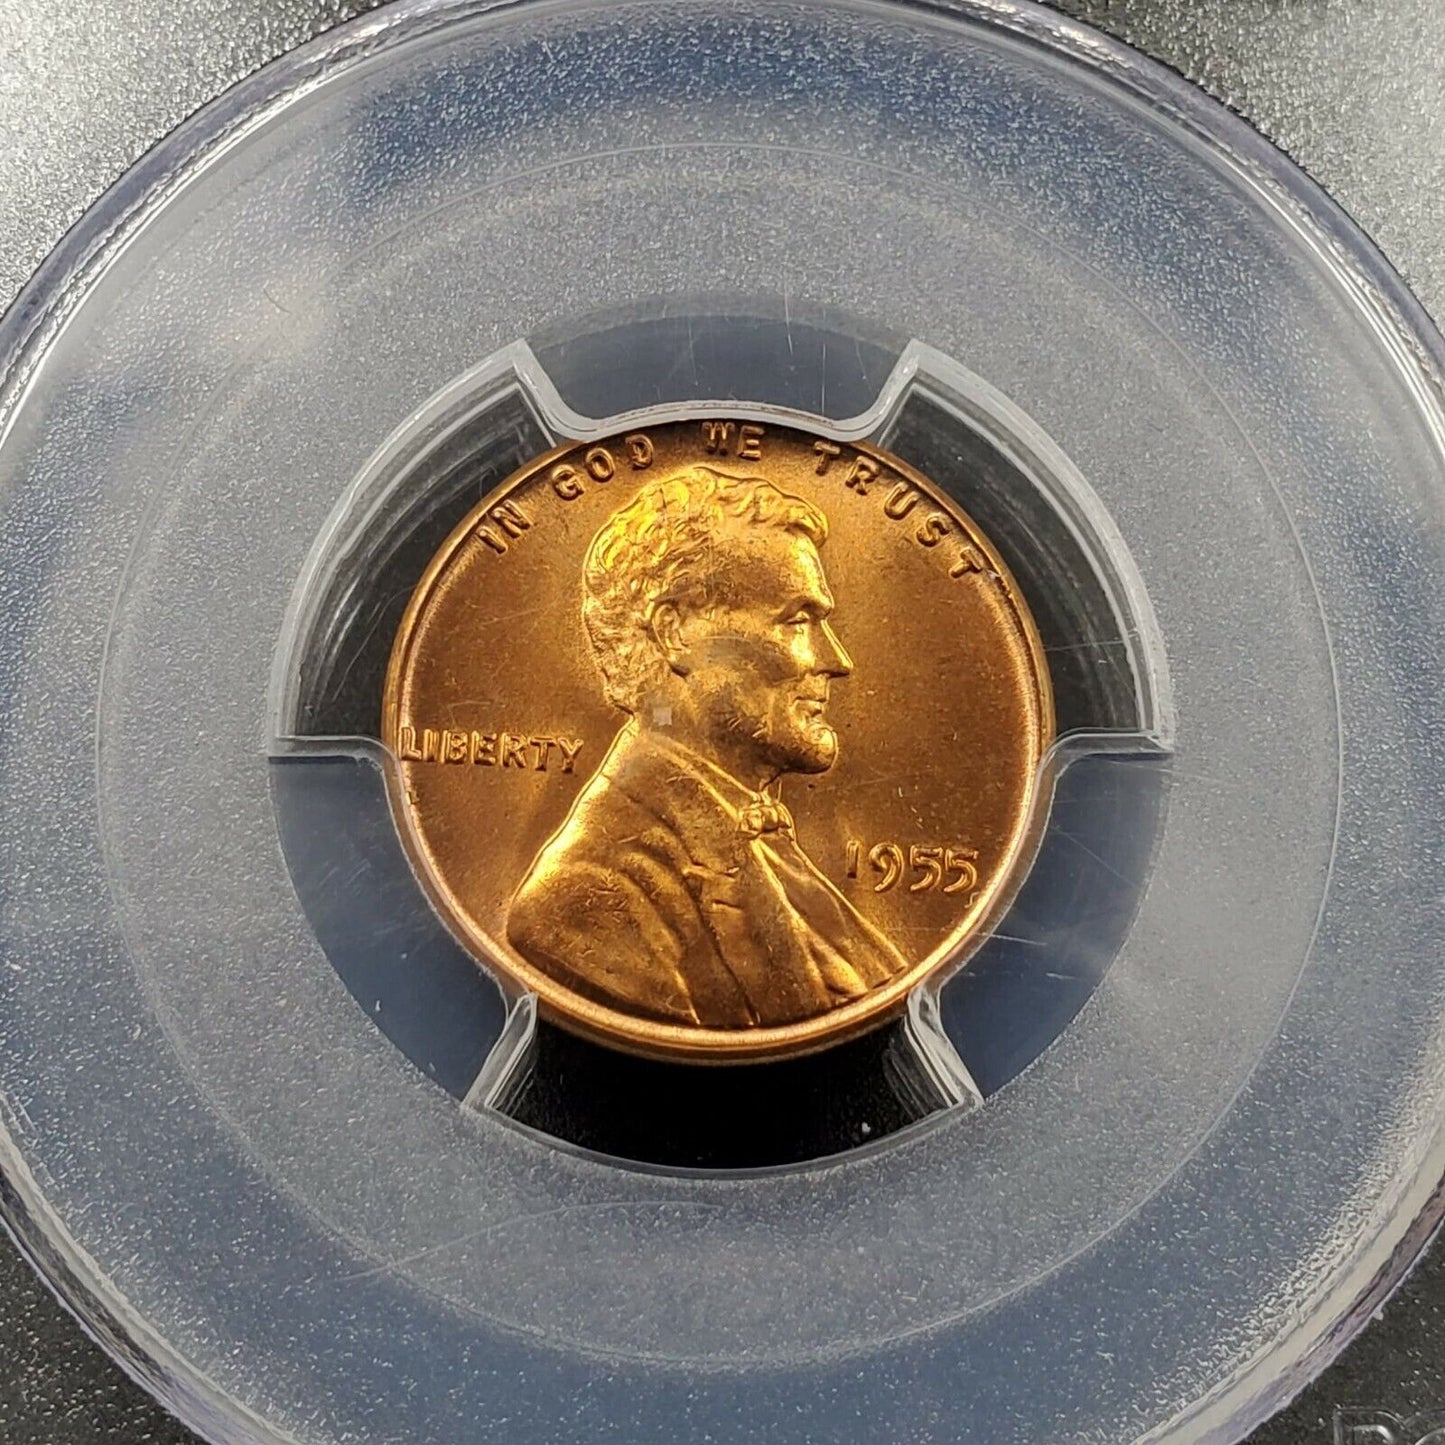 1955 P Lincoln Wheat Cent Penny Coin PCGS MS66 RD RED GEM BU CERTIFIED #2